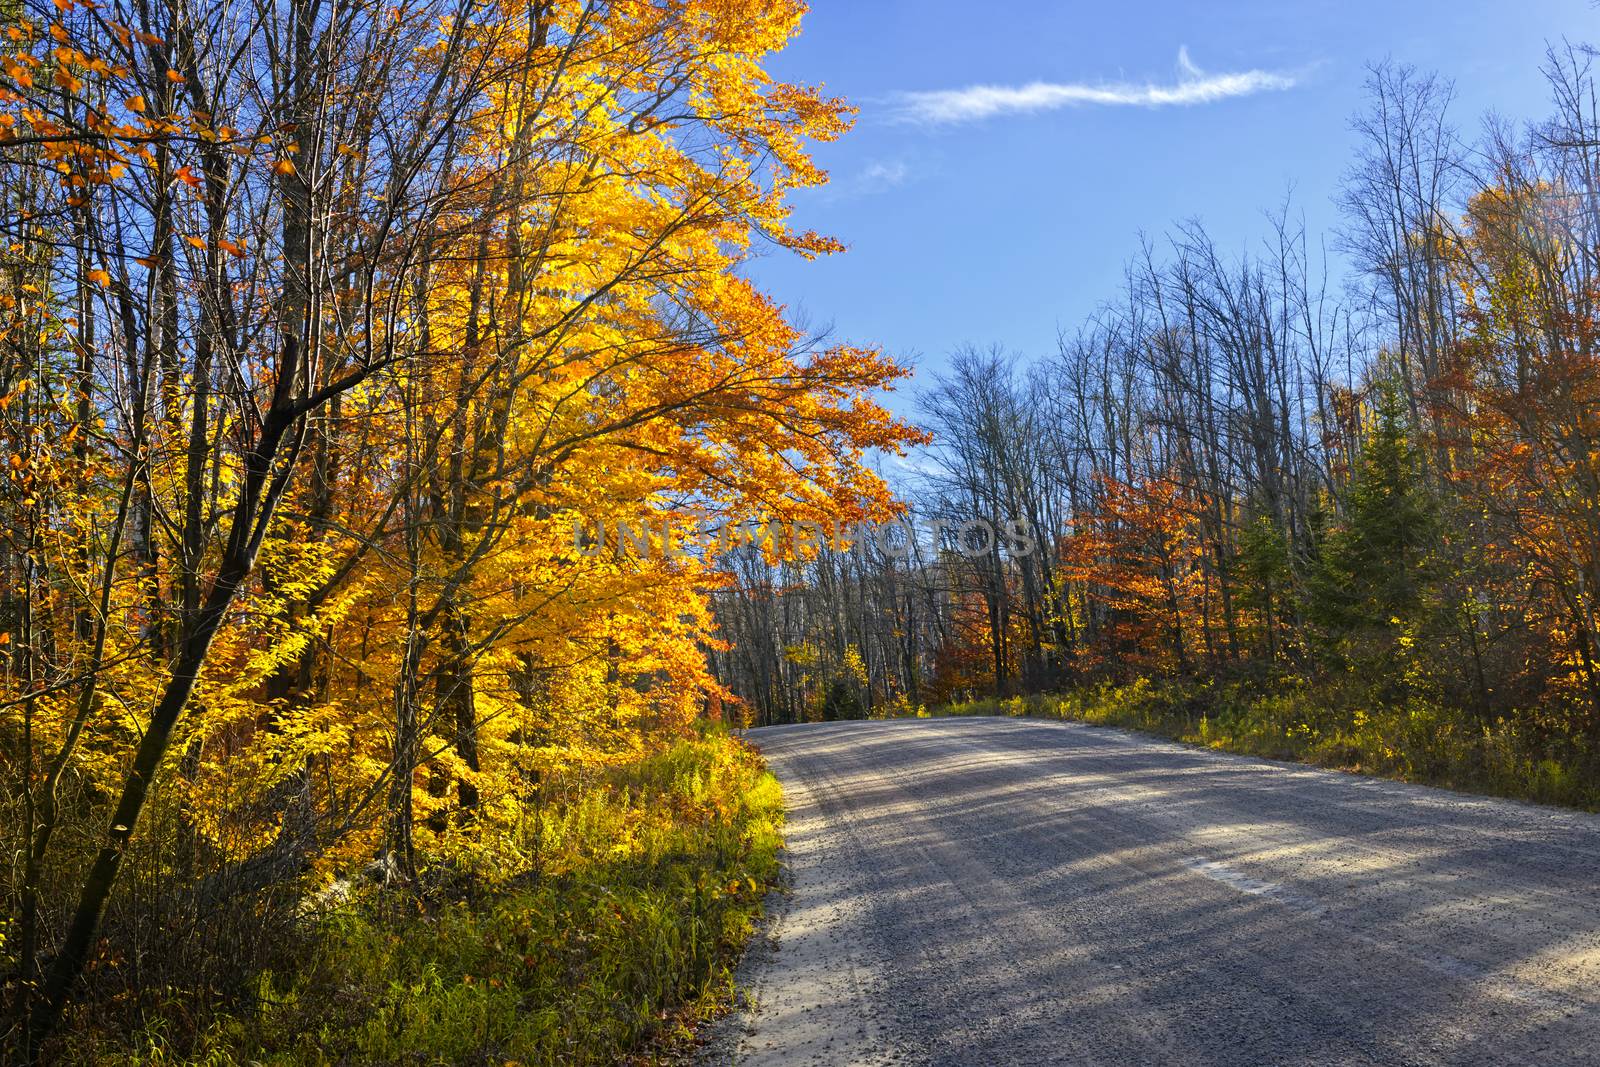 Gravel road through colorful fall forest in Ontario, Canada